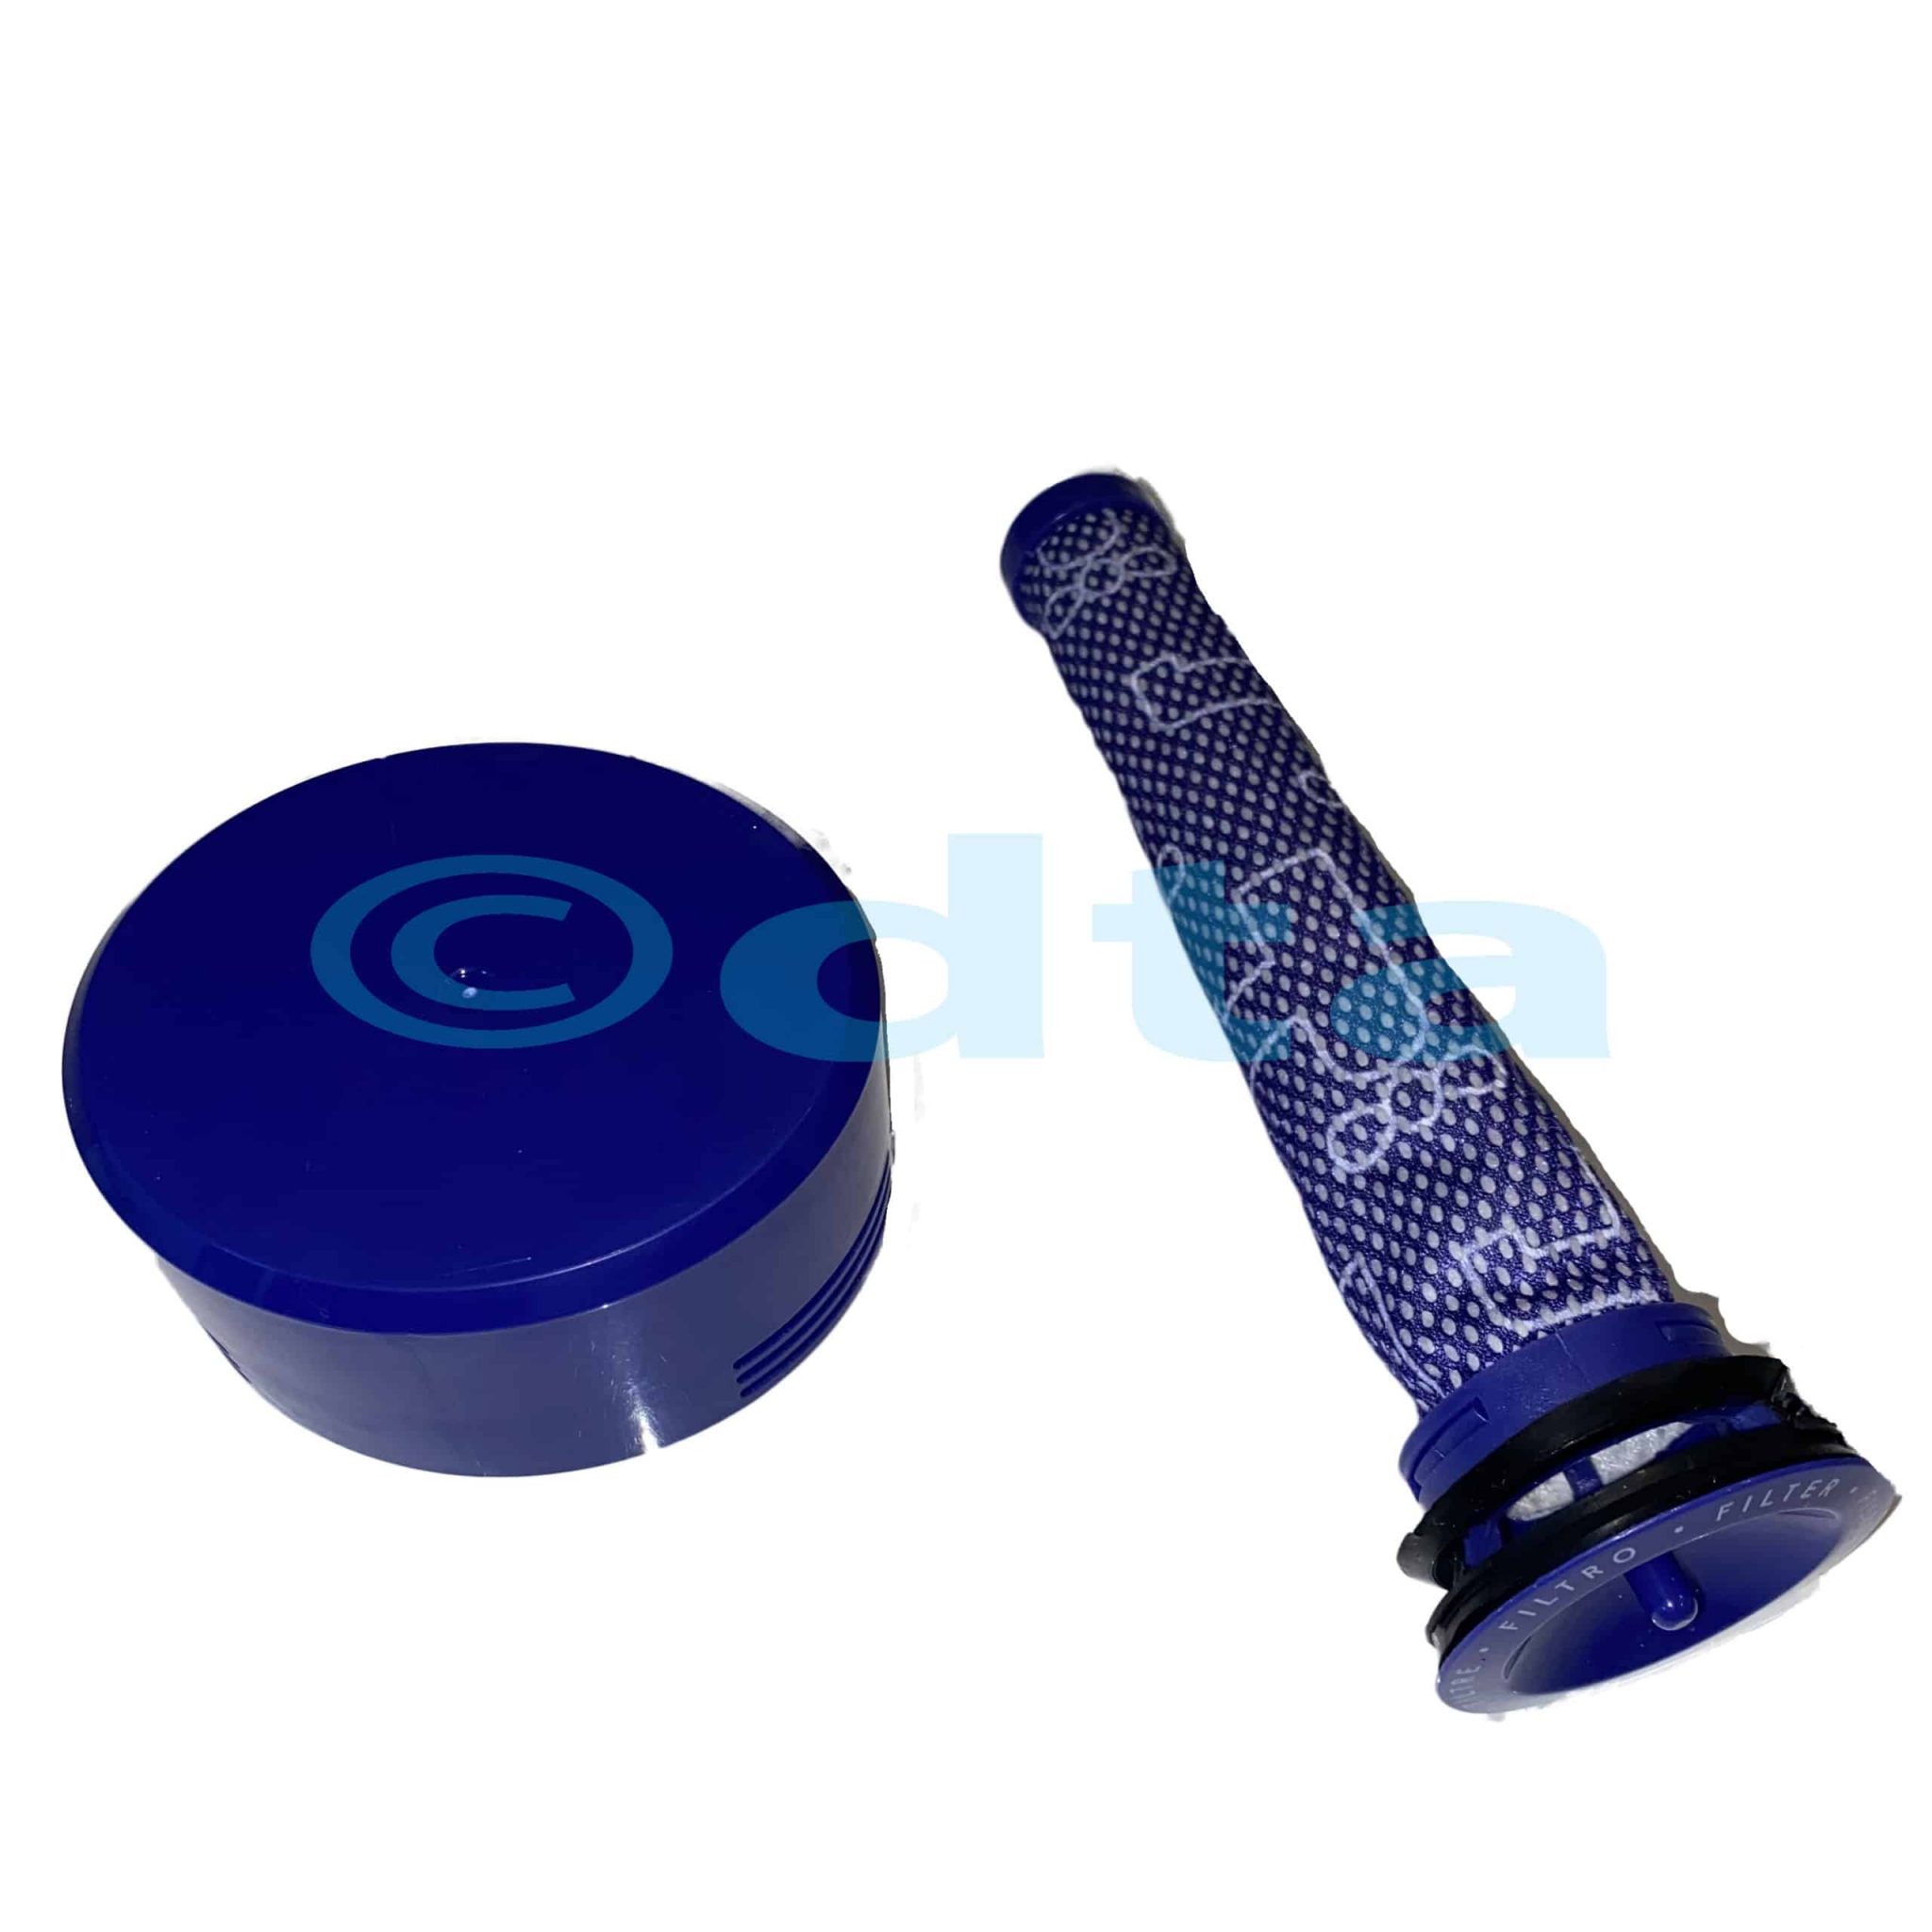 NEW PRE & Post Filter Kit For Dyson V6 Animal Absolute Cordless Vacuum  Cleaner $16.98 - PicClick AU